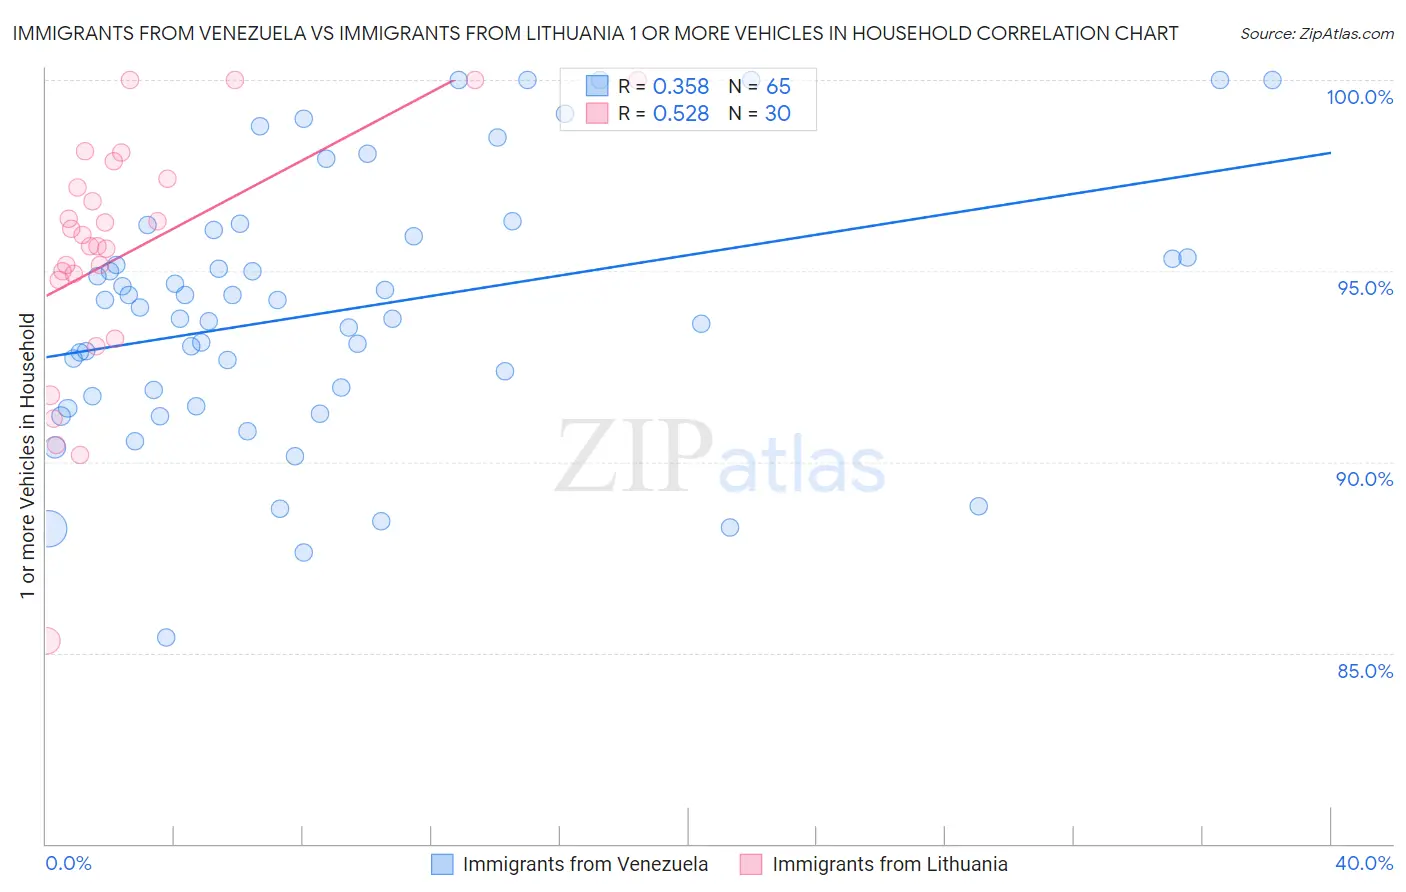 Immigrants from Venezuela vs Immigrants from Lithuania 1 or more Vehicles in Household